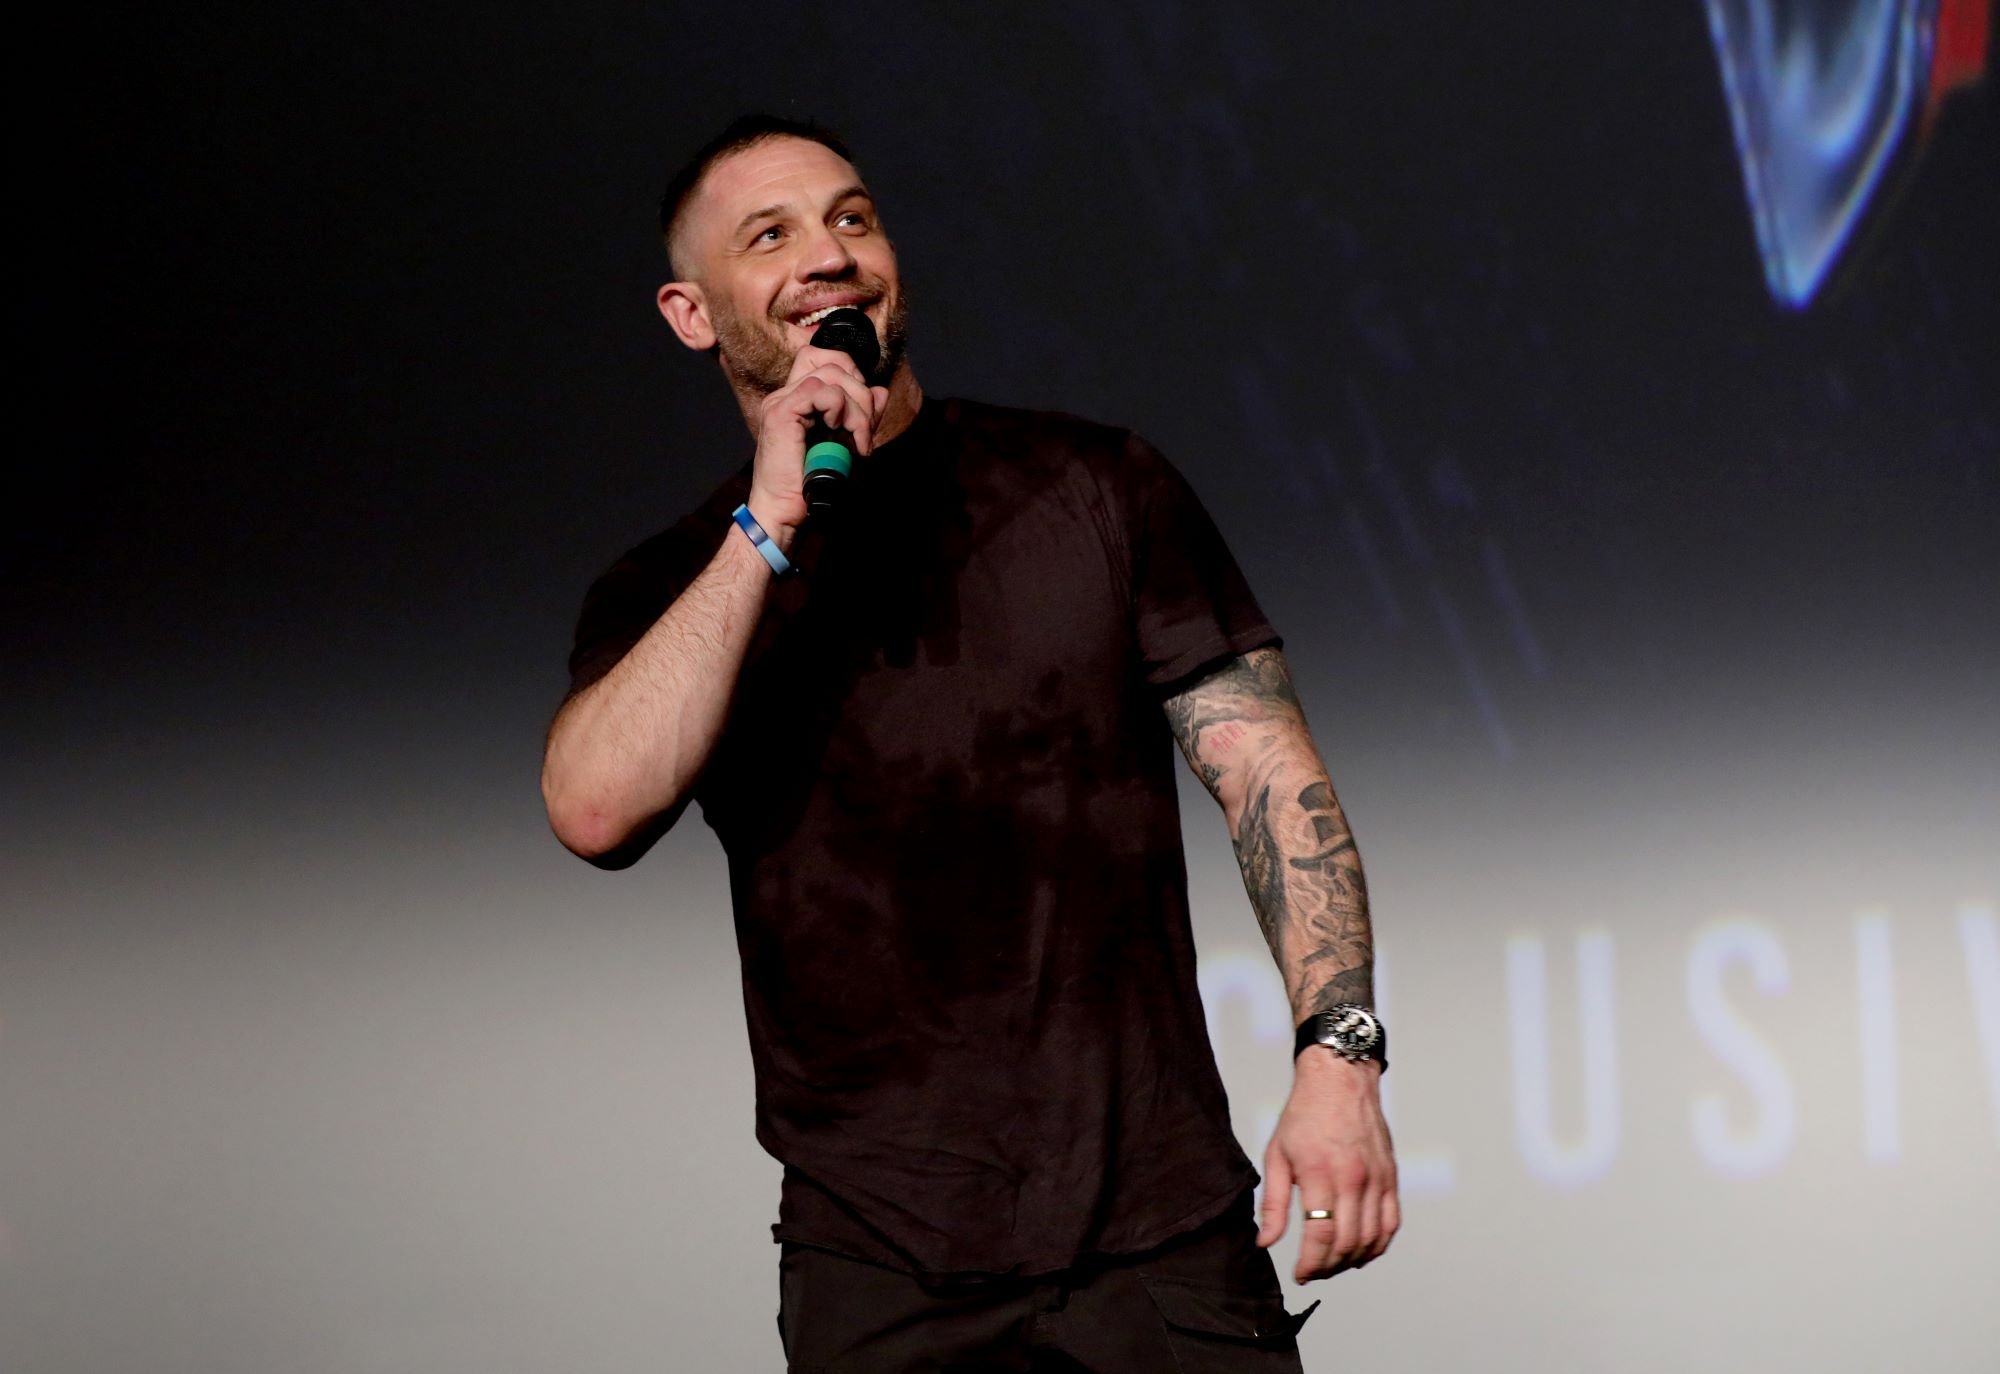 'Venom: Let There Be Carnage' star Tom Hardy, who also appeared in a post-credits scene in 'Spider-Man: No Way Home,' wears a black shirt and black pants.